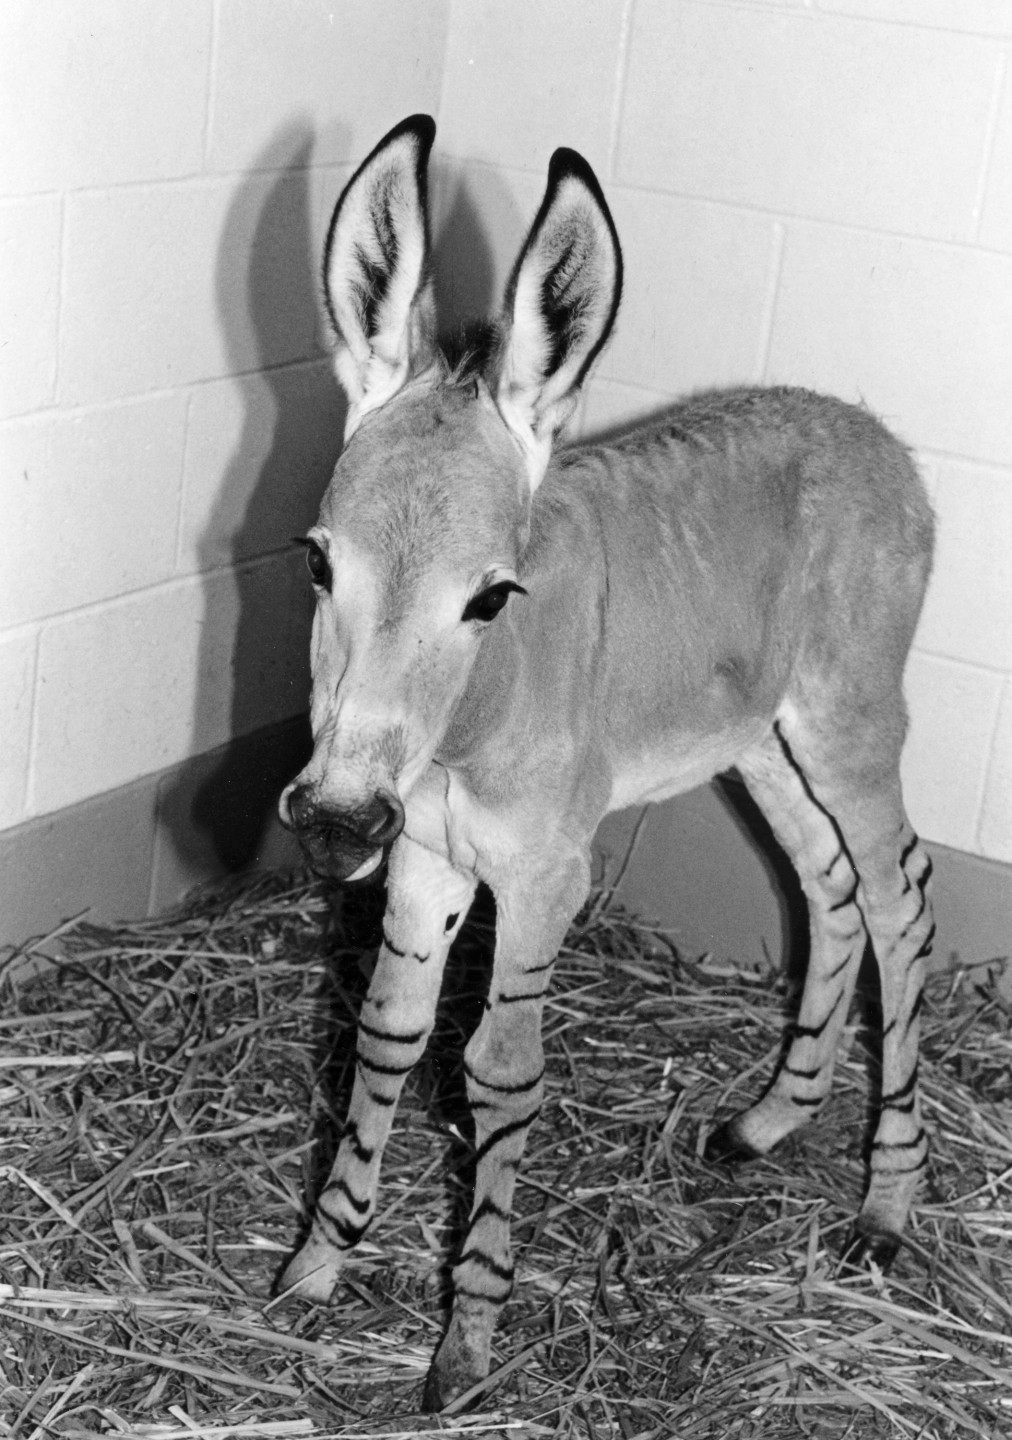 One of the most endangered species that reproduced at the Zoo in 1986 was the Somali wild ass, and this was the first birth in the Western Hemisphere.